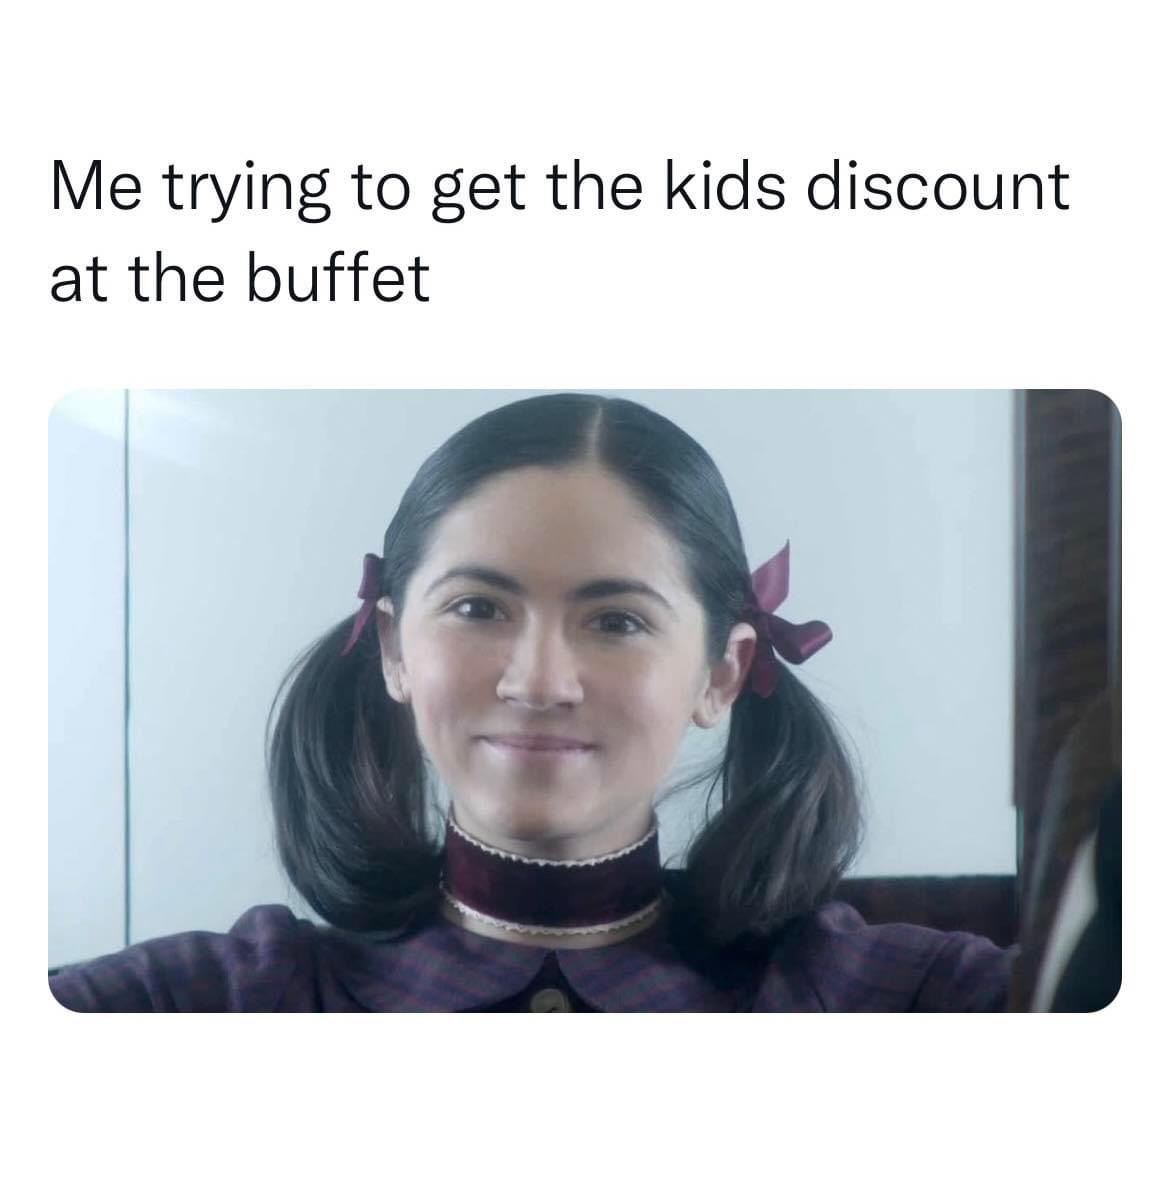 Me trying to get the kids discount at the buffet meme